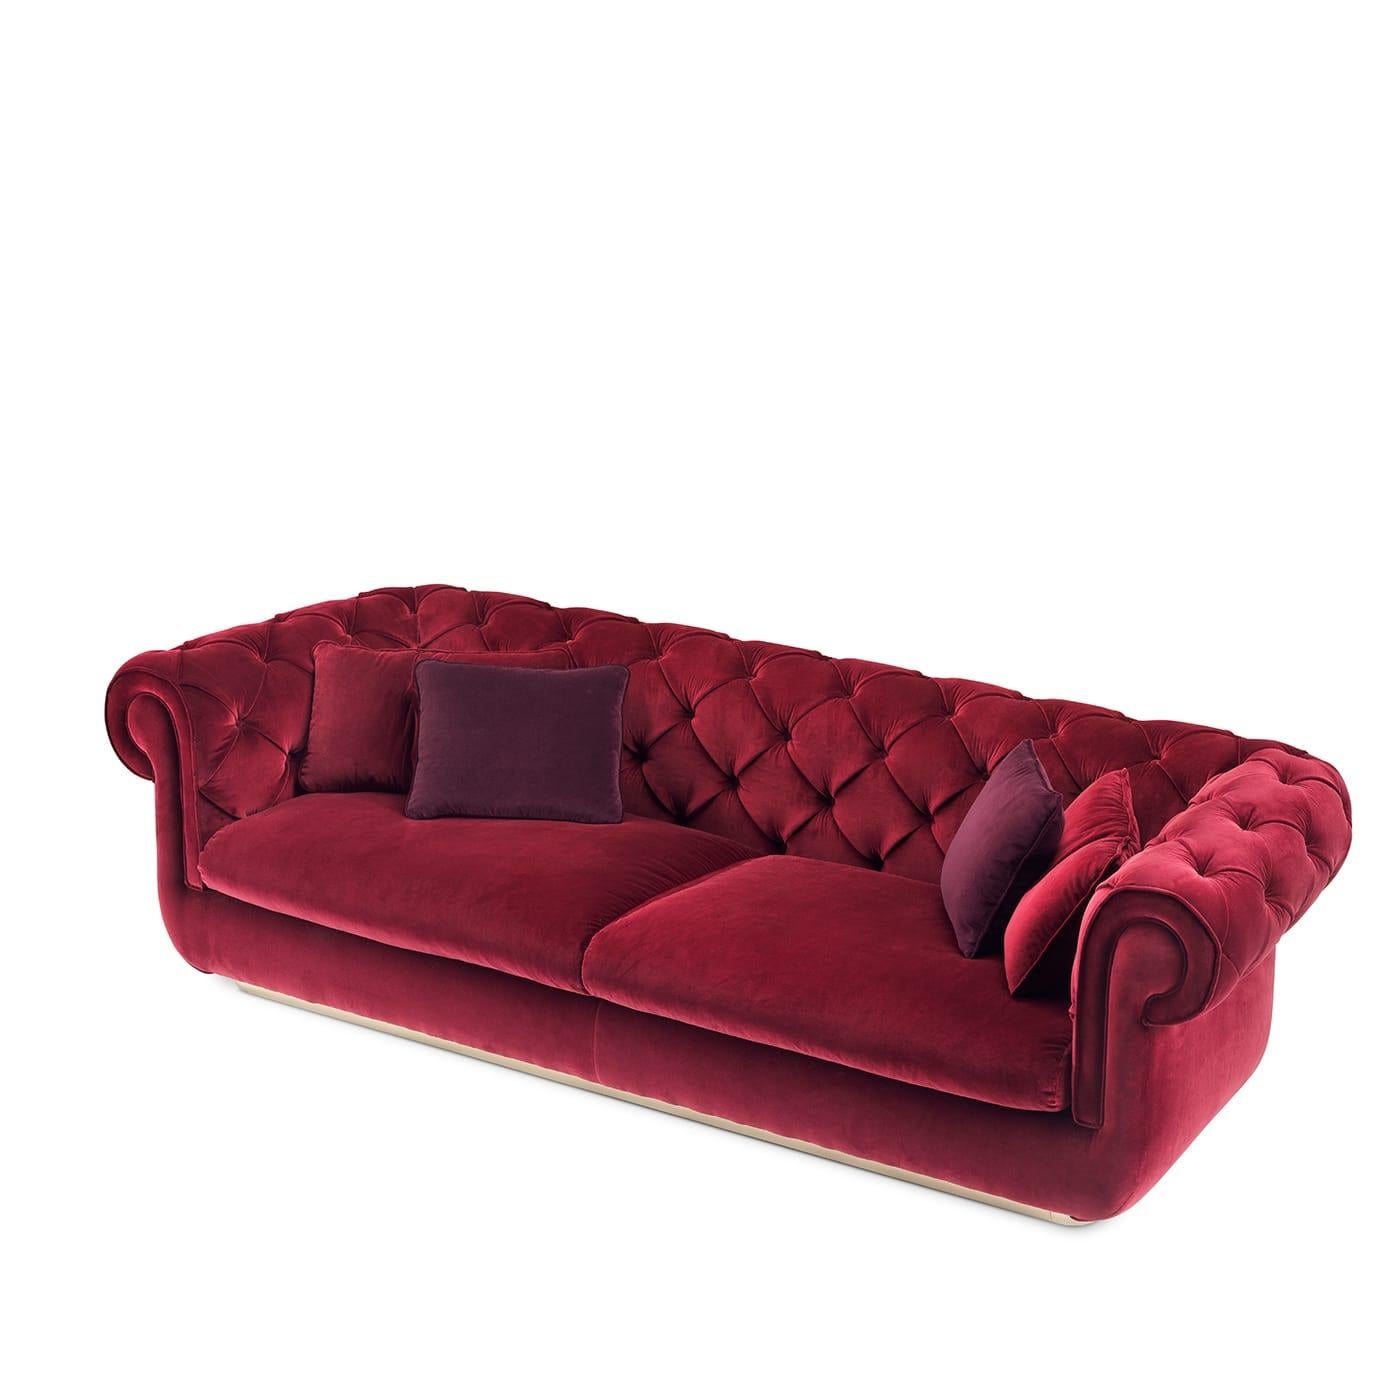 burgundy couches for sale